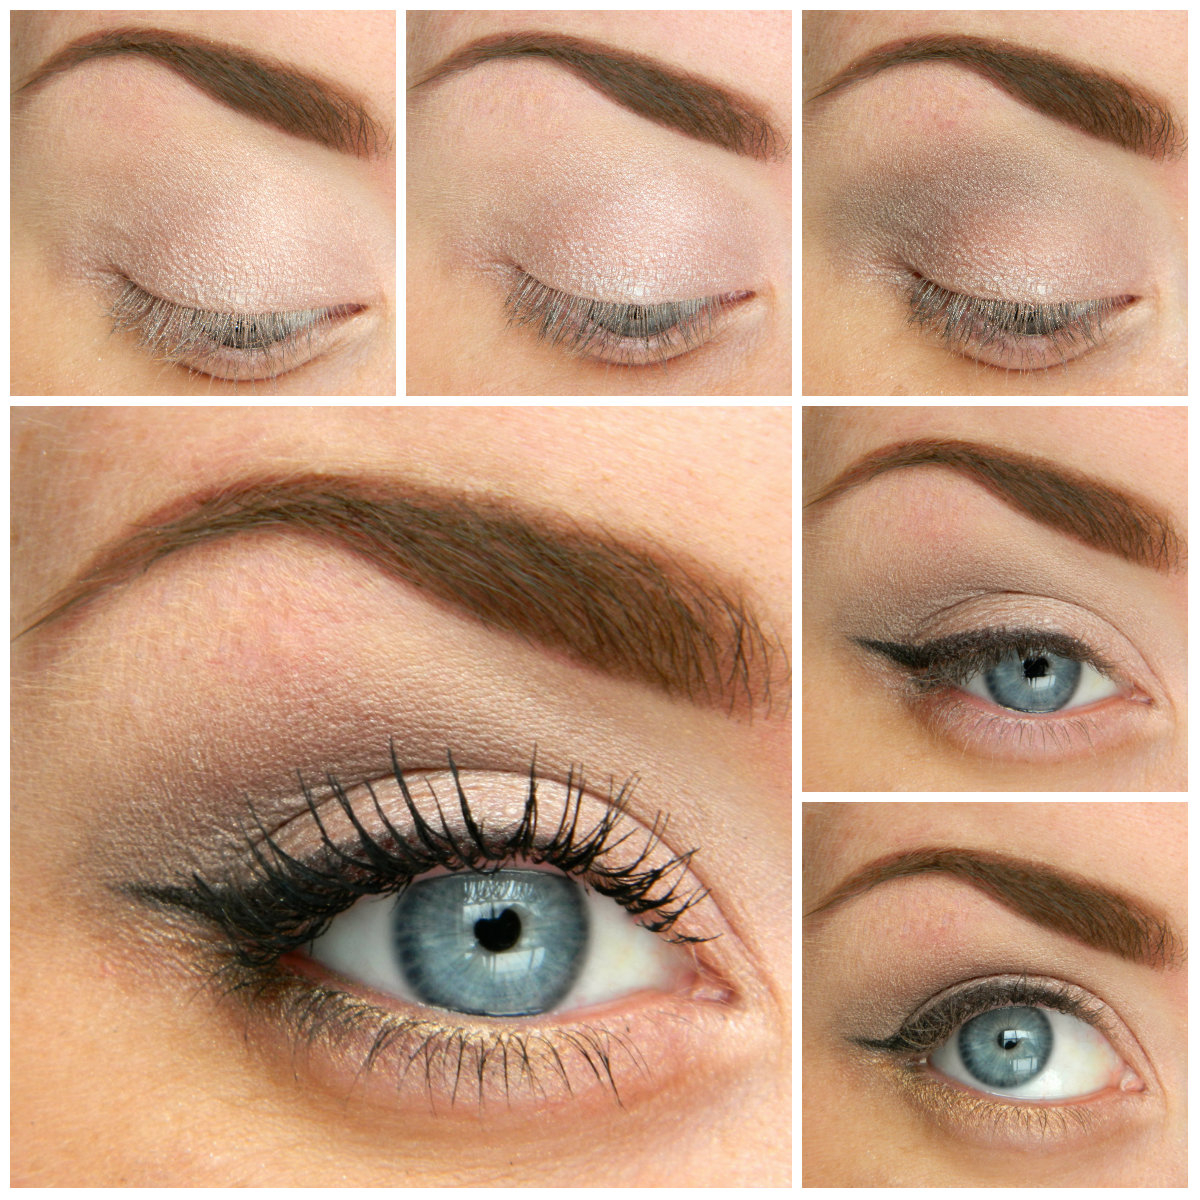 Natural Makeup Look For Blue Eyes 5 Ways To Make Blue Eyes Pop With Proper Eye Makeup Her Style Code